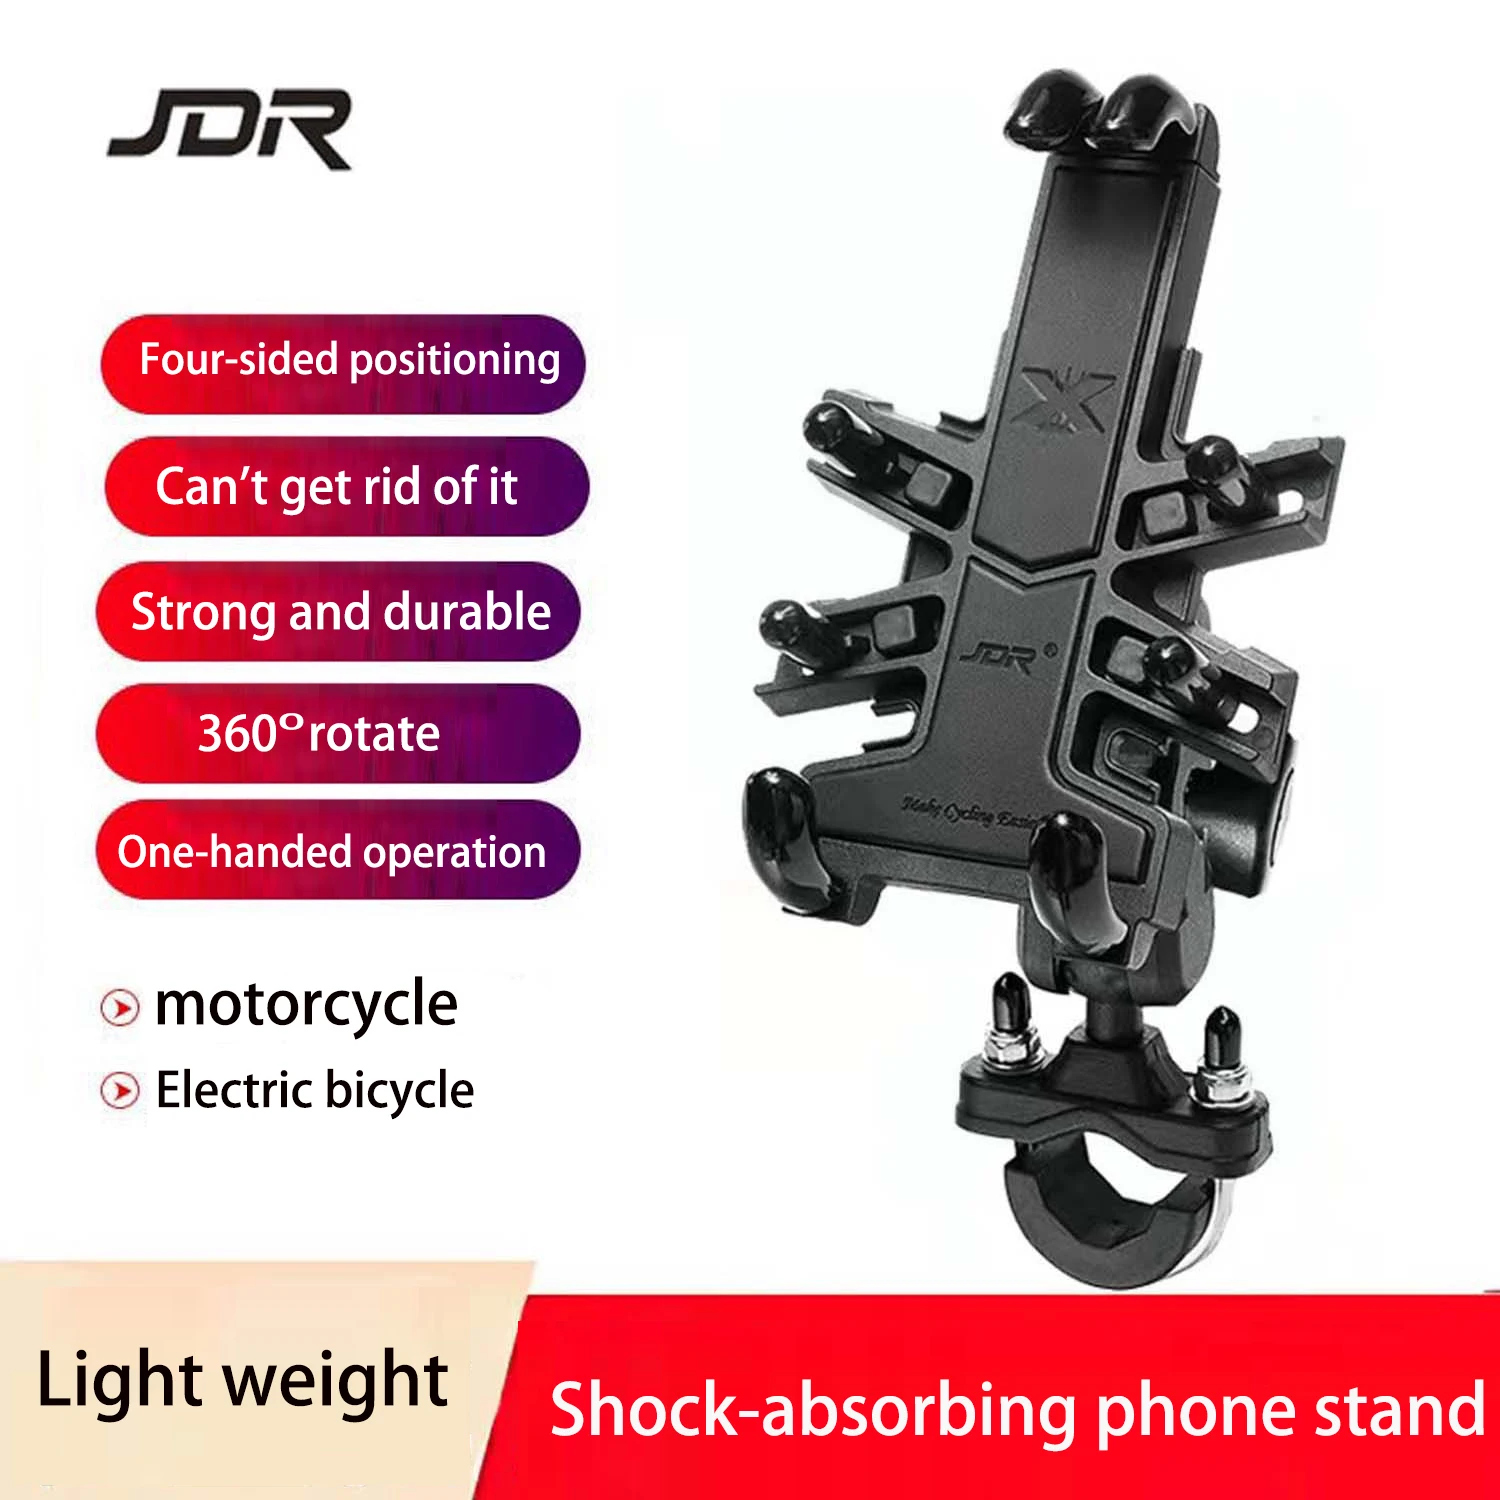 

ForSuzuki GSXS-750/1000 V-Strom 650 1000 Motorcycle shock-absorbing mobile phone navigation stand anti-shake mobile phone stand